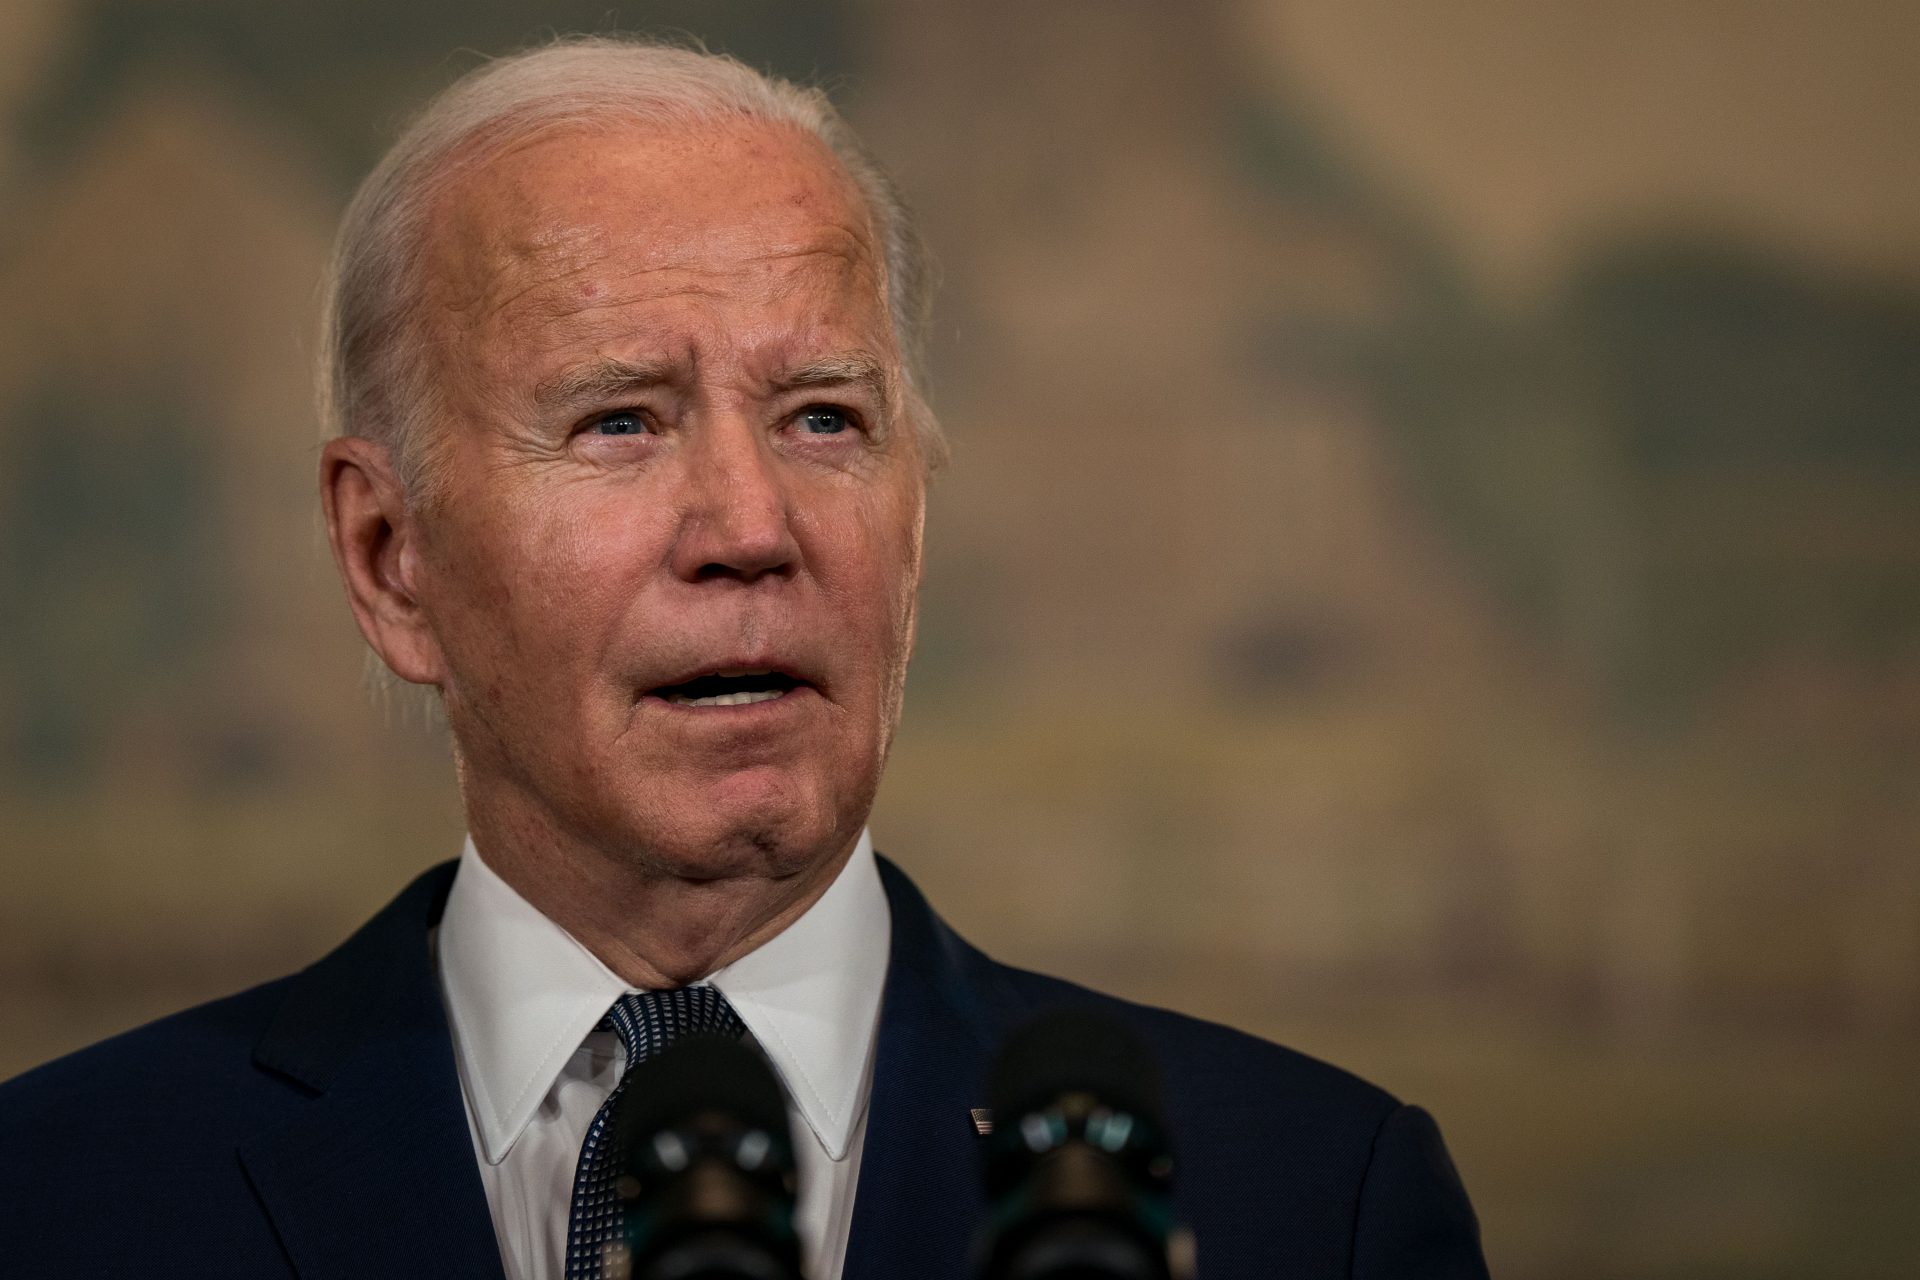 Biden wants the media to know that he wasn't the one to fall this time